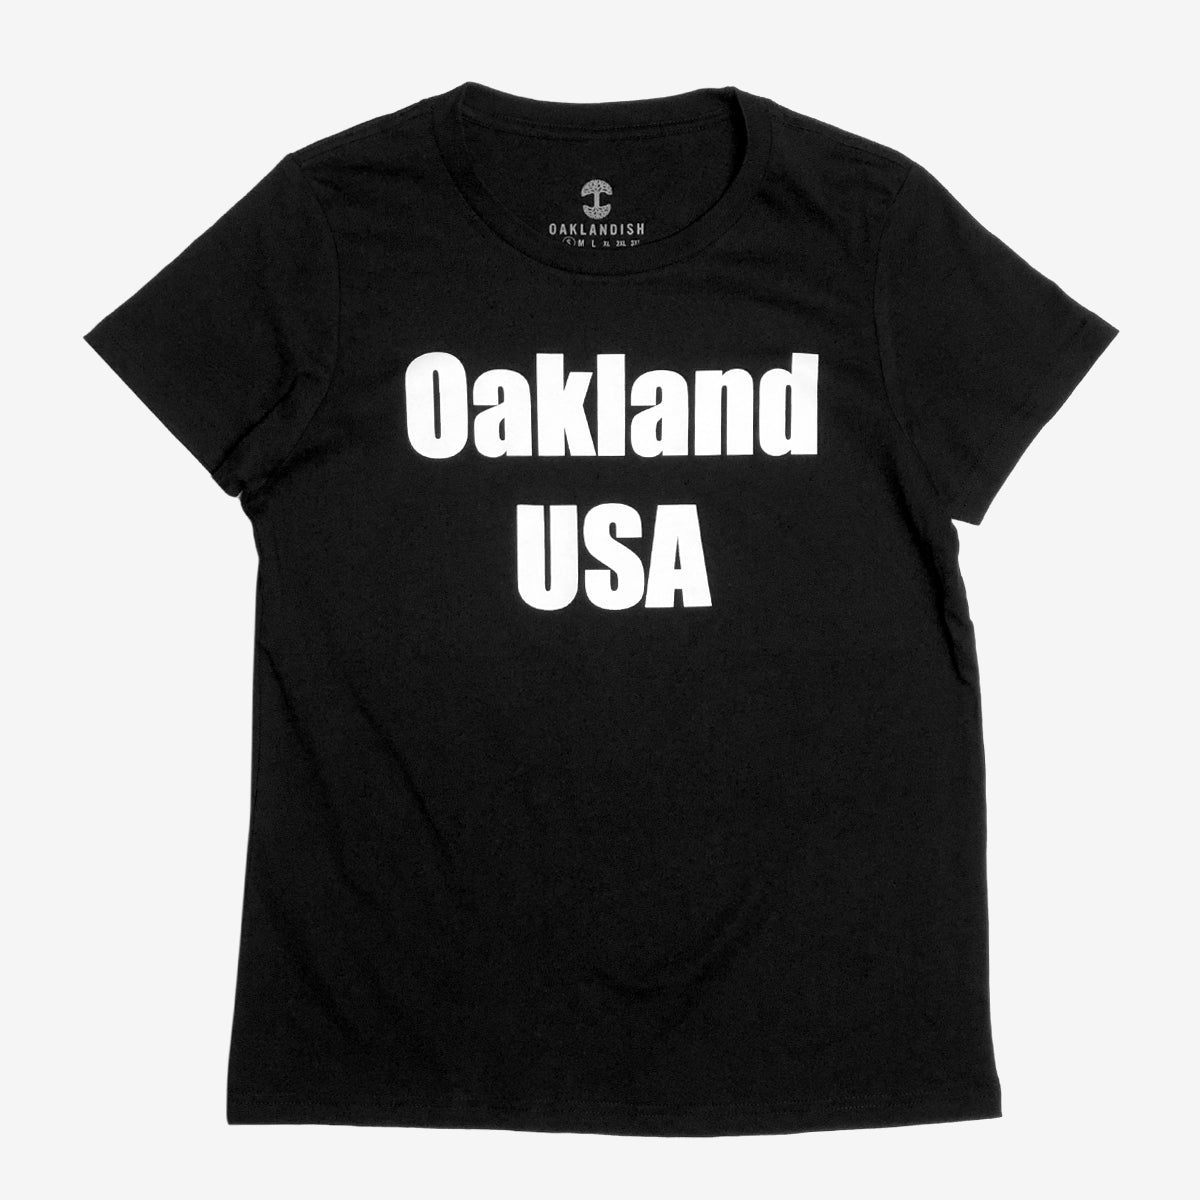 A women’s black t-shirt with a large white Oakland USA wordmark logo on the chest.